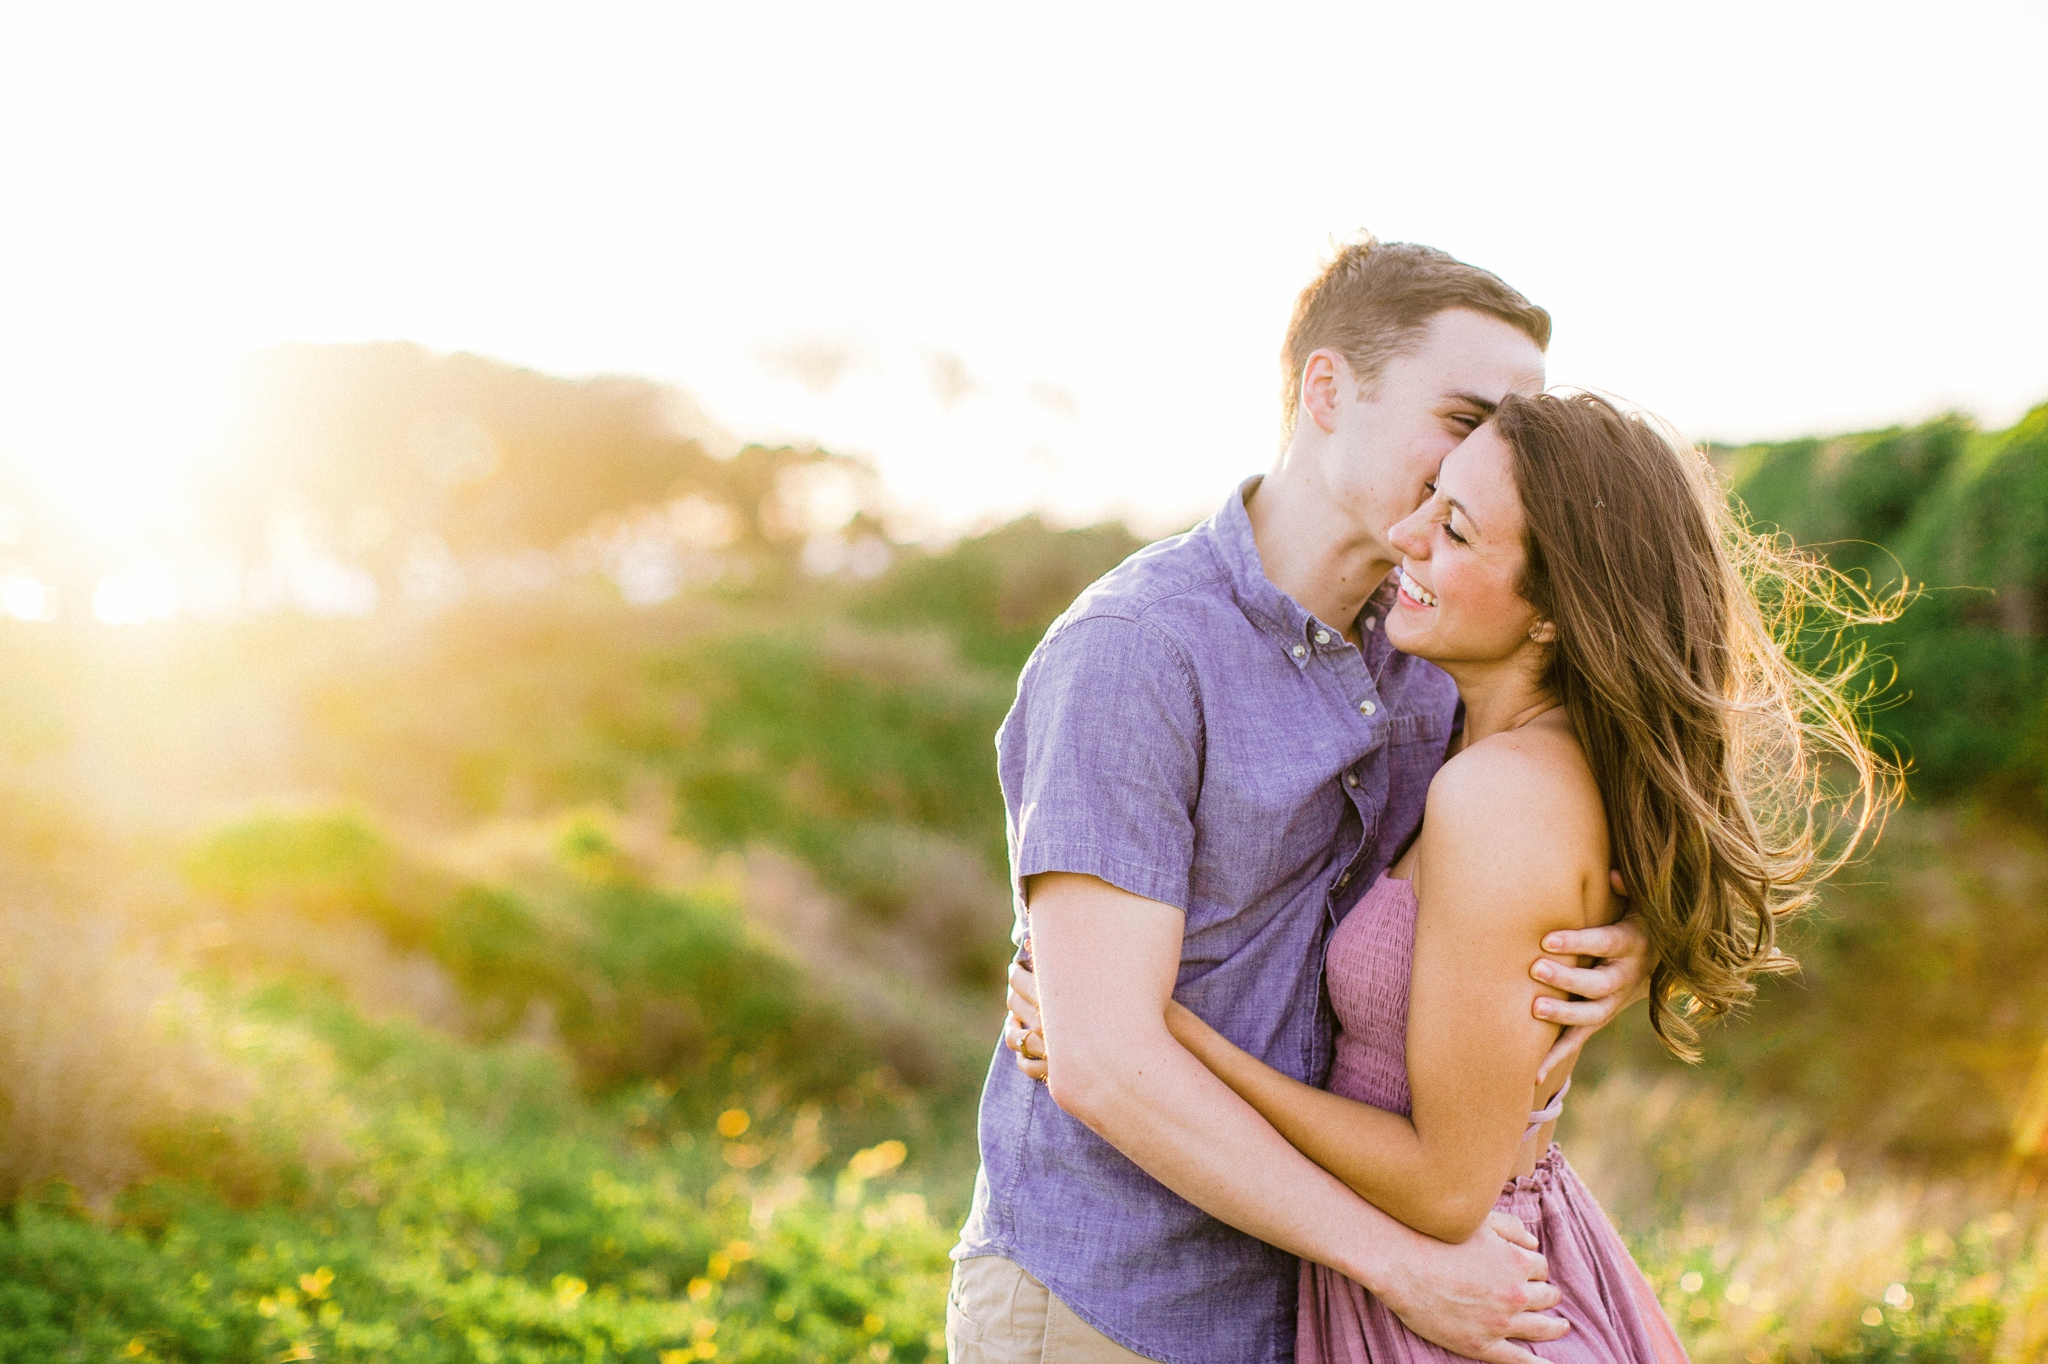  couple kissing in front of lush green dunes and hills with the sunset behind them - Woman is in a flowy pastel maxi dress - outdoor golden light session - engagement photographer in honolulu, oahu, hawaii - johanna dye photography 